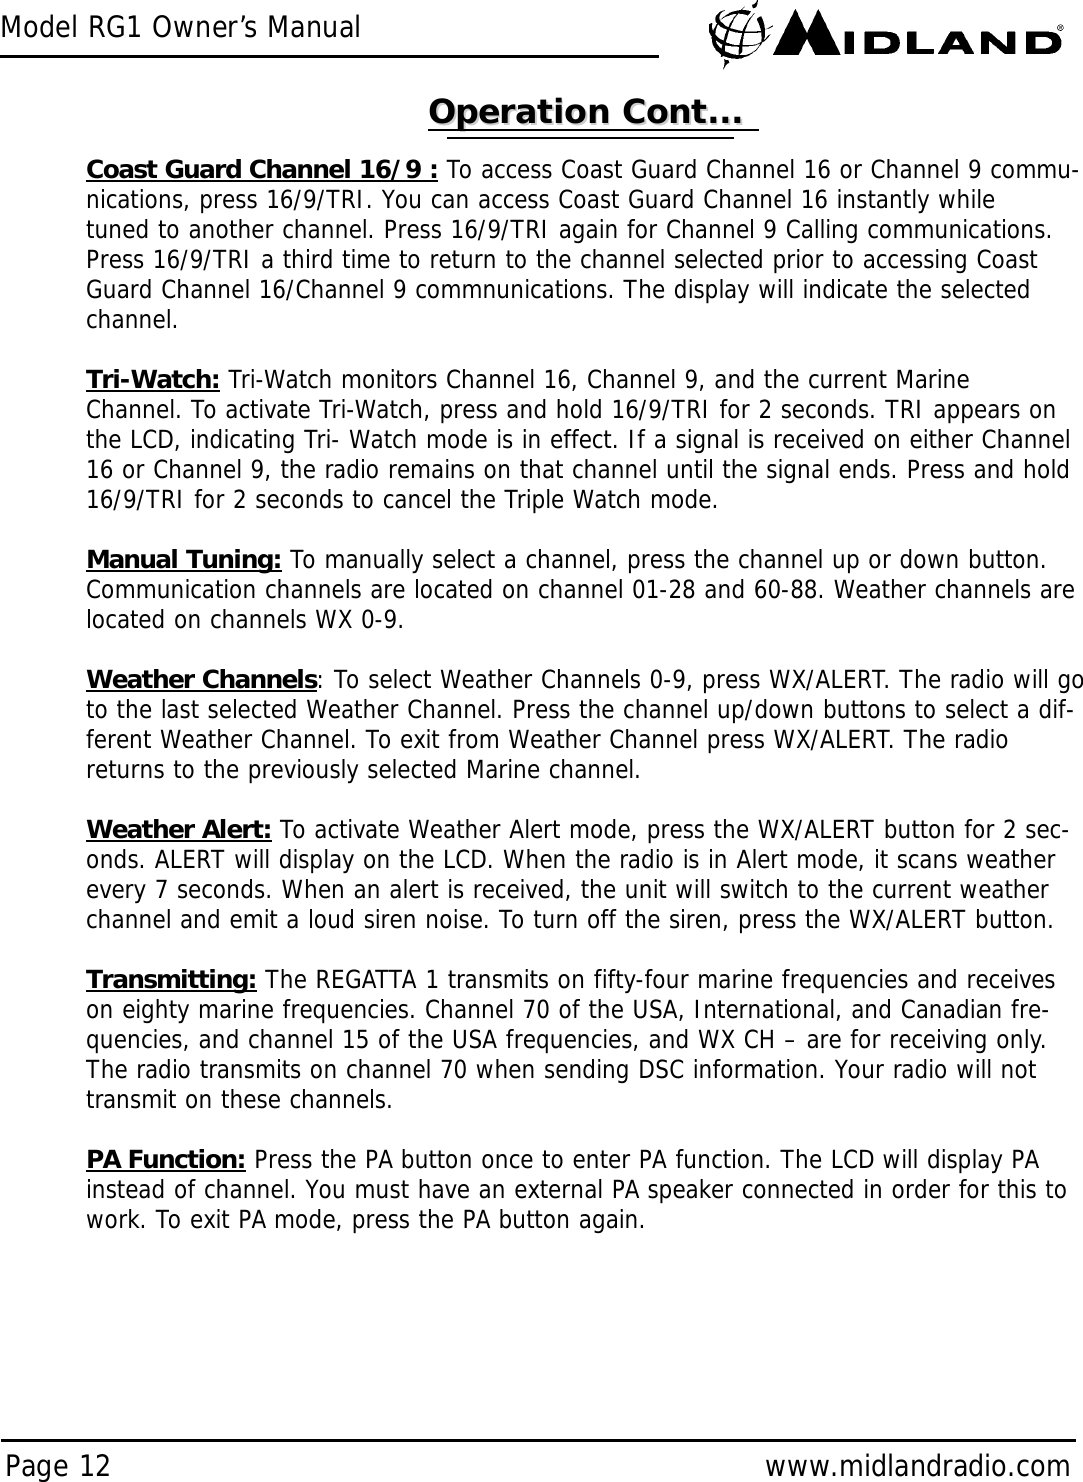 Model RG1 Owner’s ManualPage 12 www.midlandradio.comCoast Guard Channel 16/9 : To access Coast Guard Channel 16 or Channel 9 commu-nications, press 16/9/TRI. You can access Coast Guard Channel 16 instantly whiletuned to another channel. Press 16/9/TRI again for Channel 9 Calling communications.Press 16/9/TRI a third time to return to the channel selected prior to accessing CoastGuard Channel 16/Channel 9 commnunications. The display will indicate the selectedchannel. Tri-Watch: Tri-Watch monitors Channel 16, Channel 9, and the current MarineChannel. To activate Tri-Watch, press and hold 16/9/TRI for 2 seconds. TRI appears onthe LCD, indicating Tri- Watch mode is in effect. If a signal is received on either Channel16 or Channel 9, the radio remains on that channel until the signal ends. Press and hold16/9/TRI for 2 seconds to cancel the Triple Watch mode.Manual Tuning: To manually select a channel, press the channel up or down button.Communication channels are located on channel 01-28 and 60-88. Weather channels arelocated on channels WX 0-9.Weather Channels: To select Weather Channels 0-9, press WX/ALERT. The radio will goto the last selected Weather Channel. Press the channel up/down buttons to select a dif-ferent Weather Channel. To exit from Weather Channel press WX/ALERT. The radioreturns to the previously selected Marine channel.Weather Alert: To activate Weather Alert mode, press the WX/ALERT button for 2 sec-onds. ALERT will display on the LCD. When the radio is in Alert mode, it scans weatherevery 7 seconds. When an alert is received, the unit will switch to the current weatherchannel and emit a loud siren noise. To turn off the siren, press the WX/ALERT button.Transmitting: The REGATTA 1 transmits on fifty-four marine frequencies and receiveson eighty marine frequencies. Channel 70 of the USA, International, and Canadian fre-quencies, and channel 15 of the USA frequencies, and WX CH – are for receiving only.The radio transmits on channel 70 when sending DSC information. Your radio will nottransmit on these channels.PA Function: Press the PA button once to enter PA function. The LCD will display PAinstead of channel. You must have an external PA speaker connected in order for this towork. To exit PA mode, press the PA button again.Operation Cont...Operation Cont...